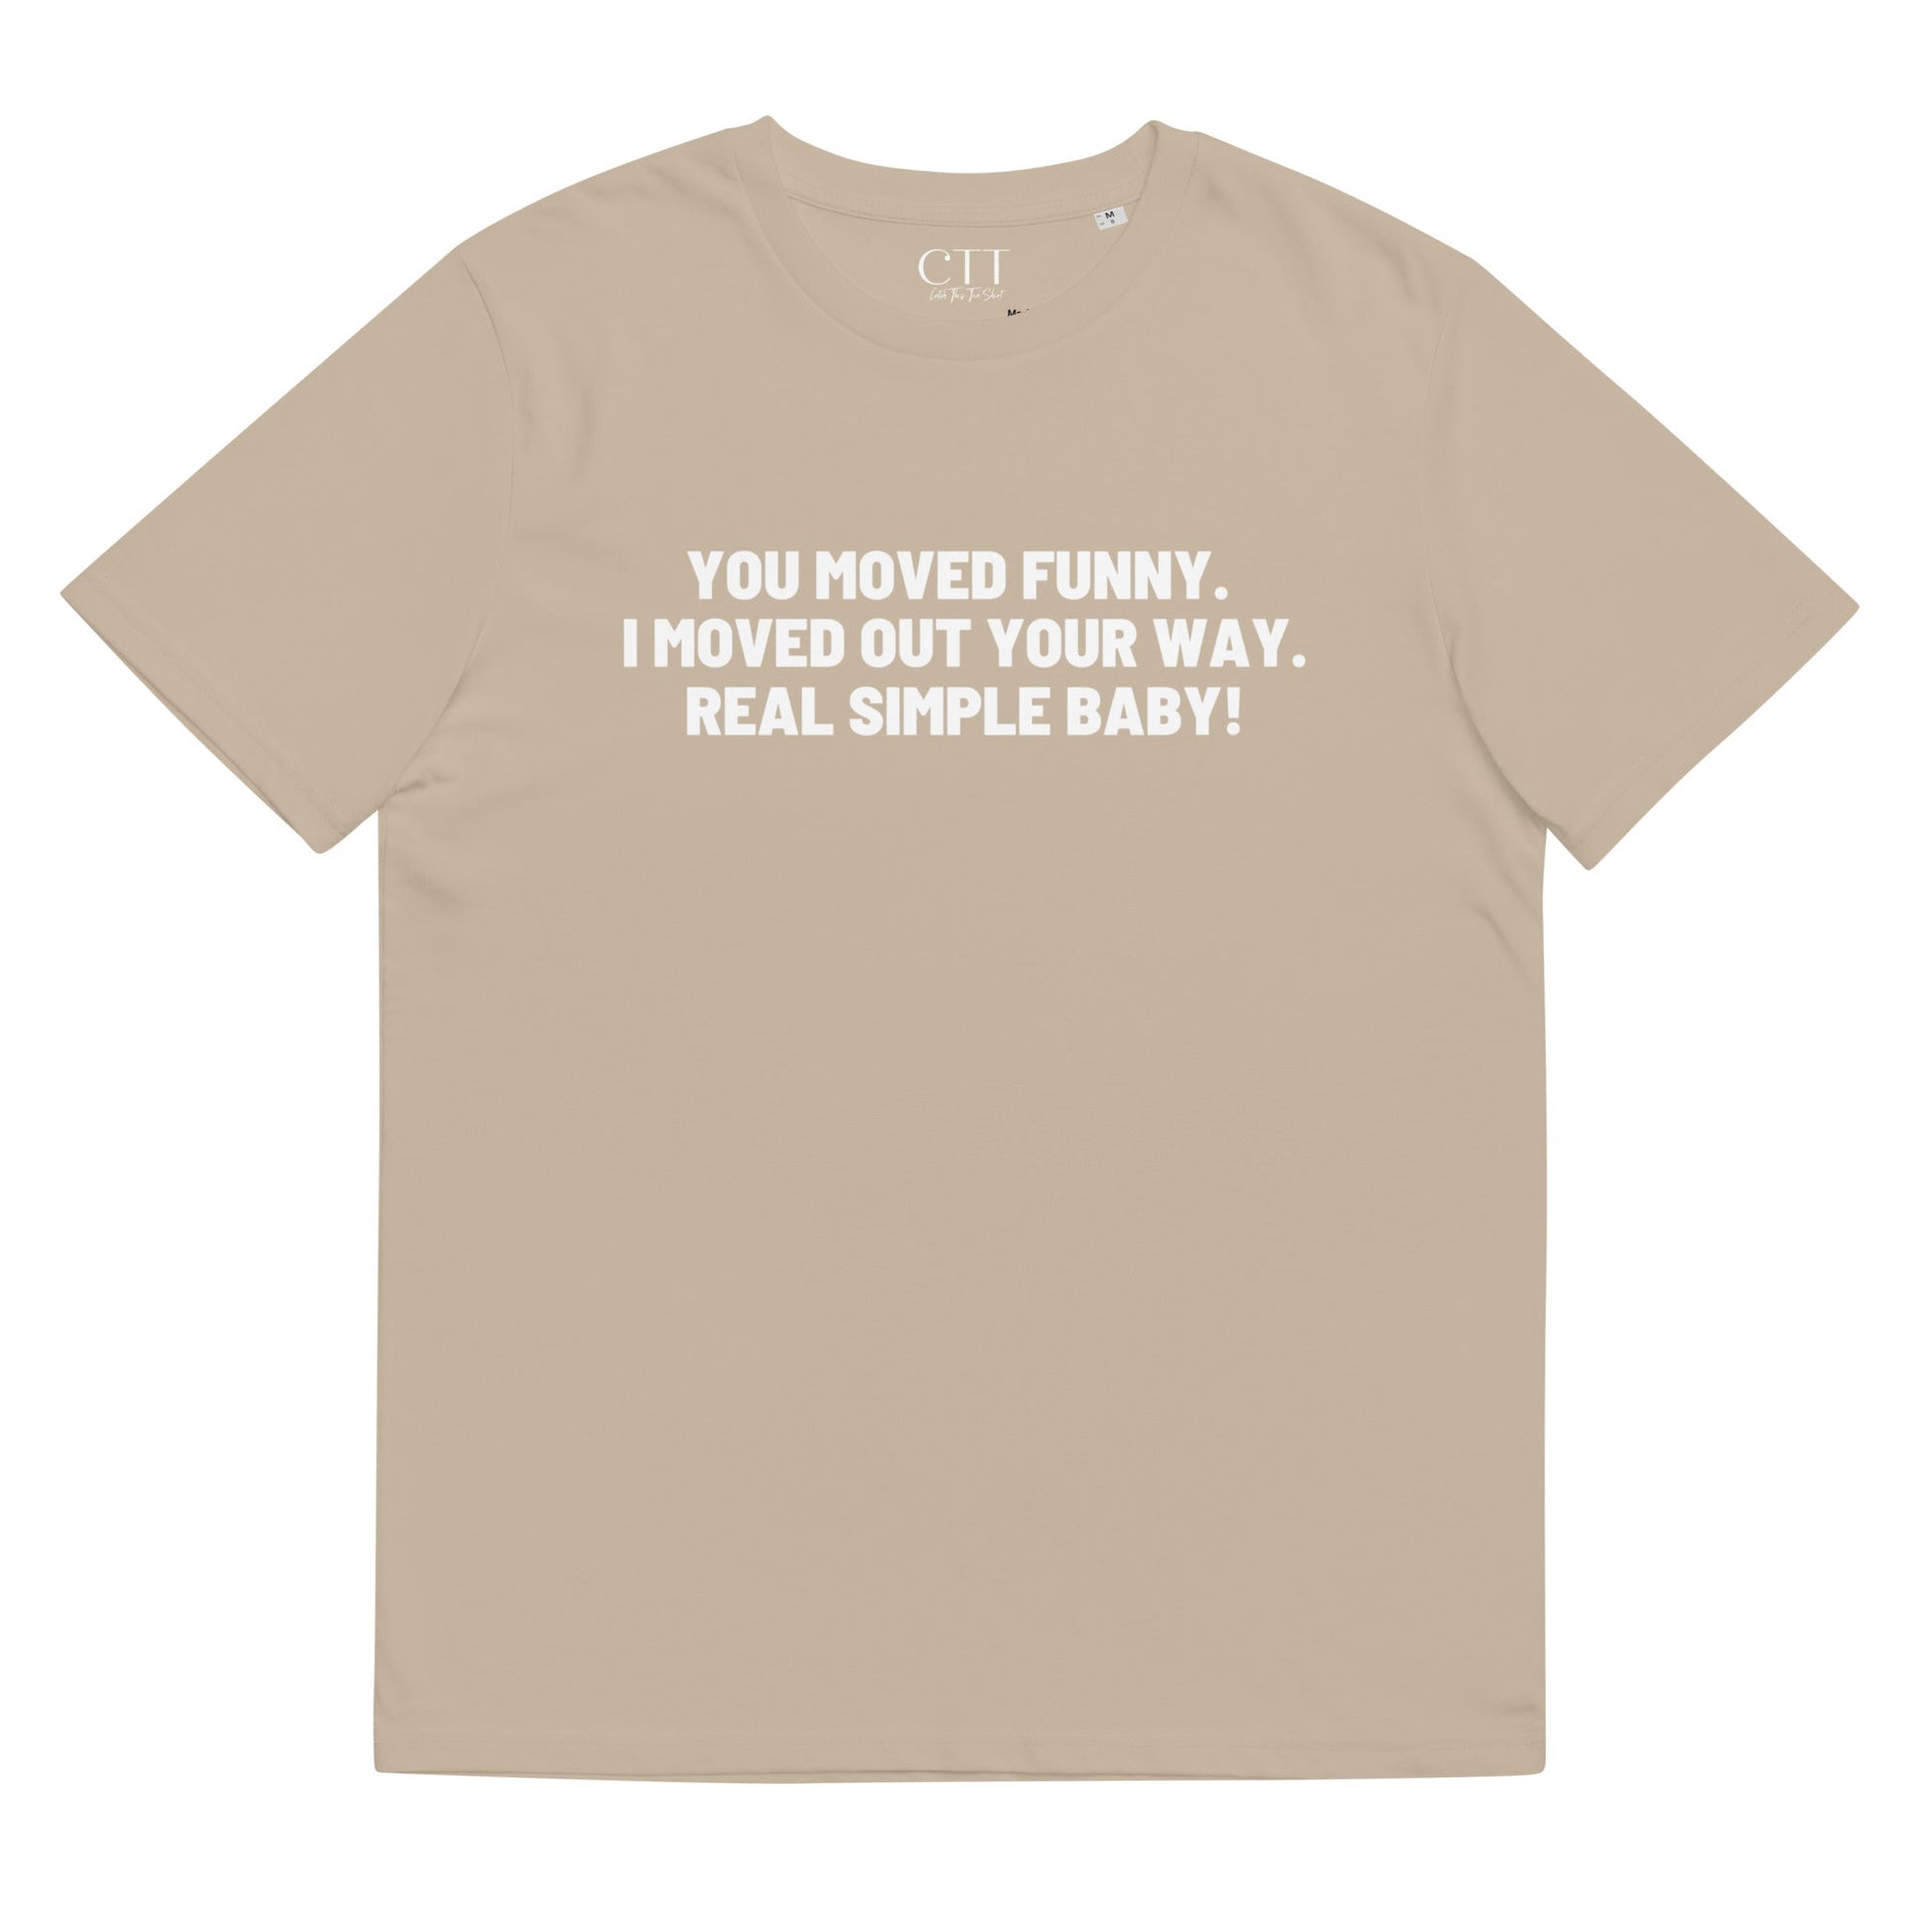 You Moved Funny. I Moved Out Your Way. Real Simple Baby.| Premium Soft Organic Cotton T-shirt | Unisex - Catch This Tea Shirt